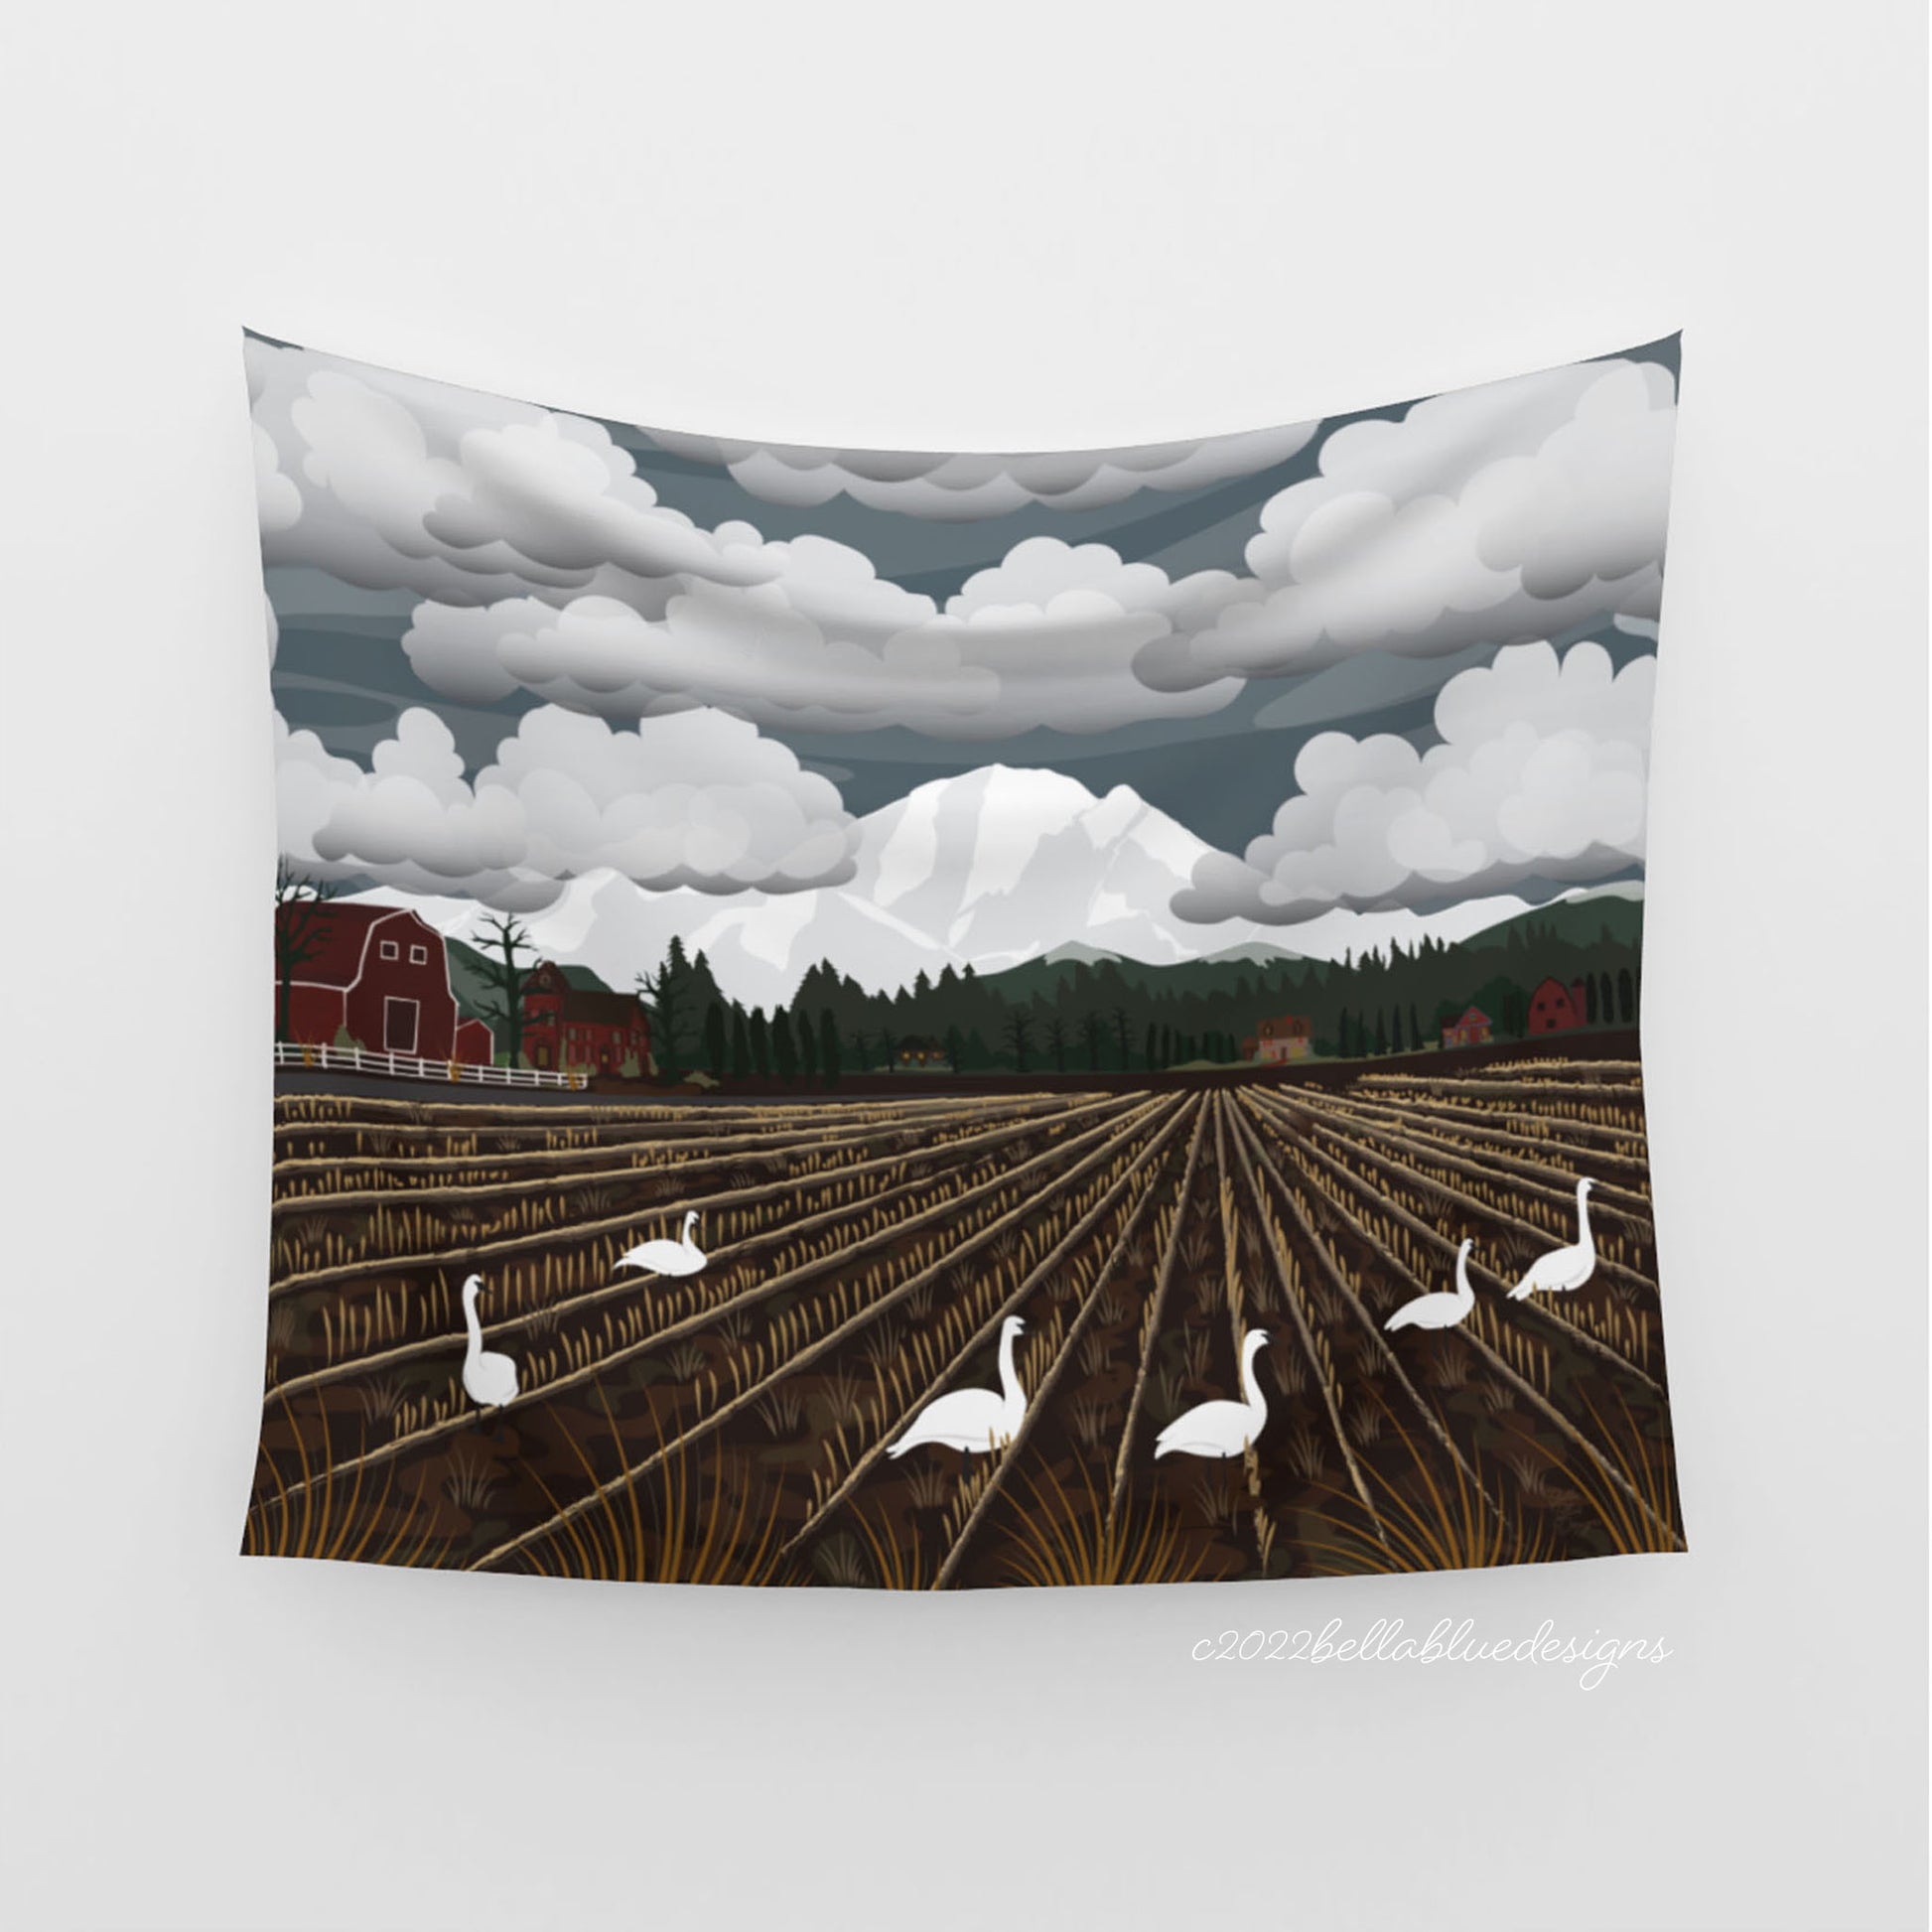 mockup for tapestry with digital design showing Swans frolic in the mud below Mt Baker with clouds over it as a surprised barn watches